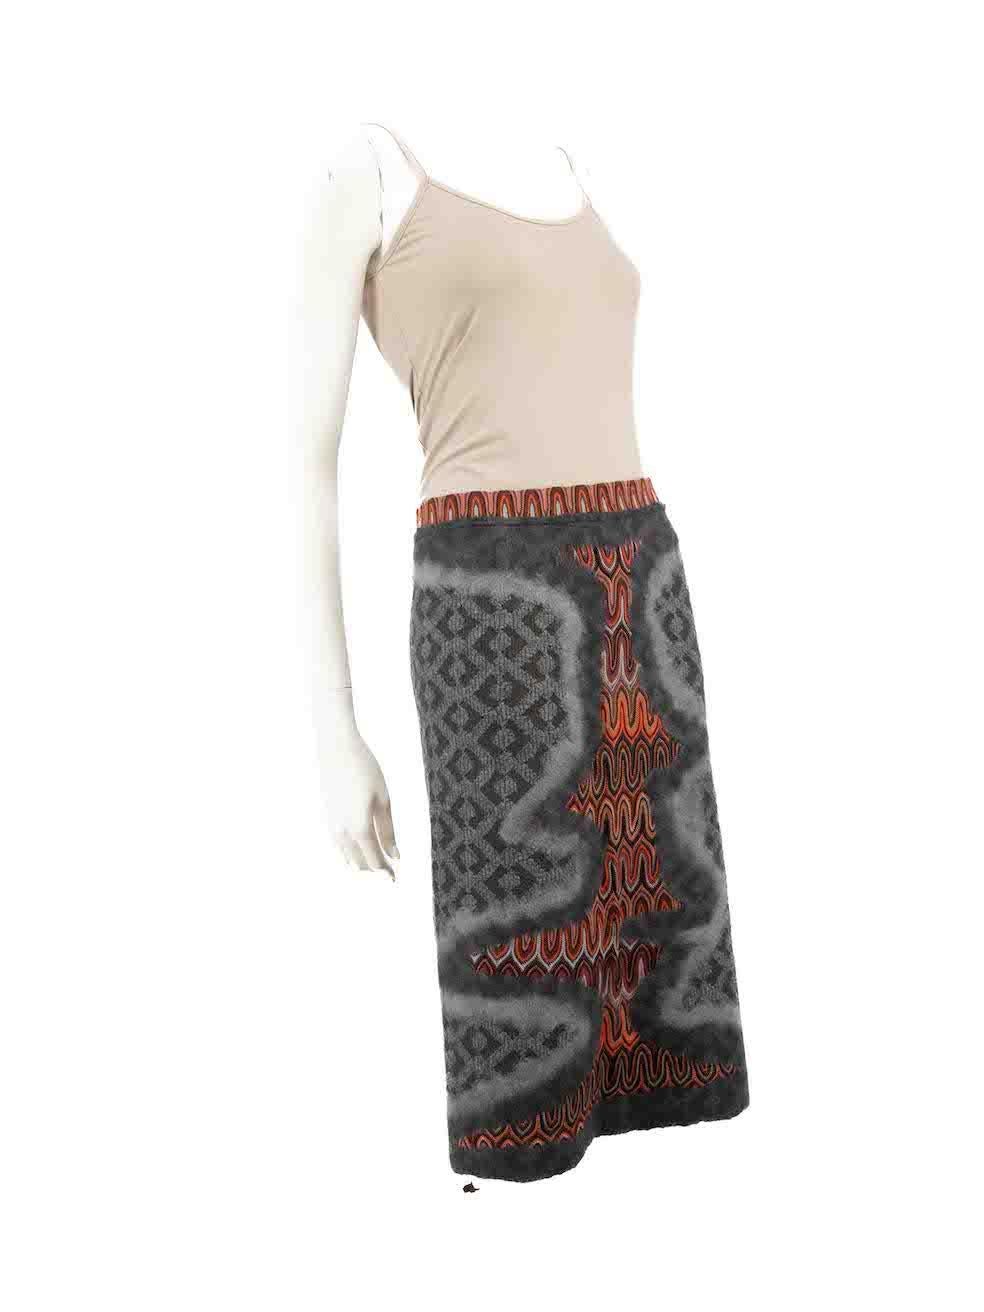 CONDITION is Very good. Hardly any visible wear to skirt is evident on this used Missoni designer resale item.
 
 
 
 Details
 
 
 Grey
 
 Wool
 
 Pencil skirt
 
 Abstract pattern
 
 Side zip and hook fastening
 
 Knee length
 
 
 
 
 
 Made in